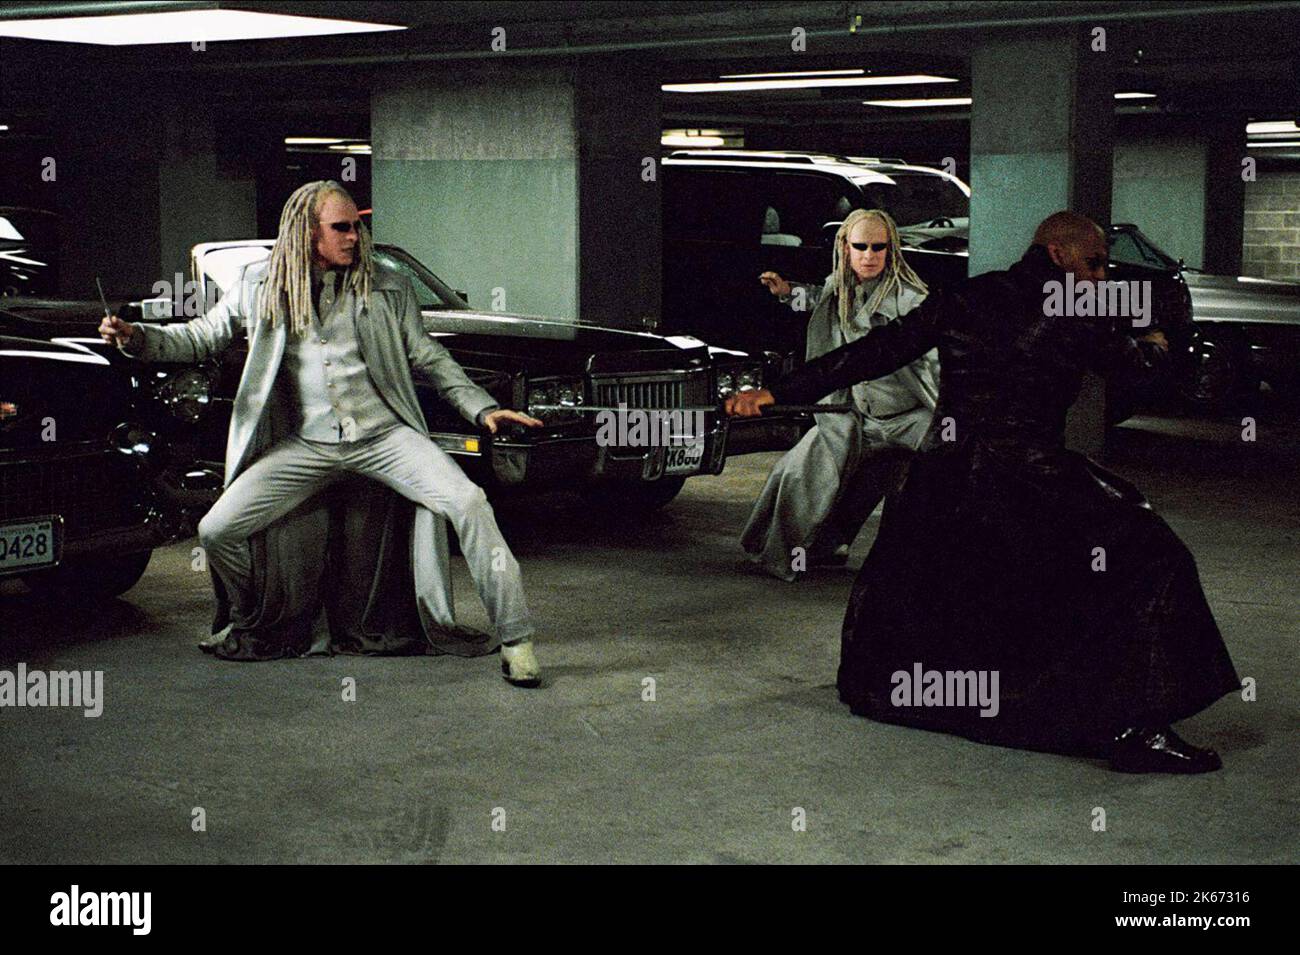 NEIL RAYMENT, ADRIAN RAYMENT, LAURENCE FISHBURNE, THE MATRIX RELOADED, 2003 Stock Photo